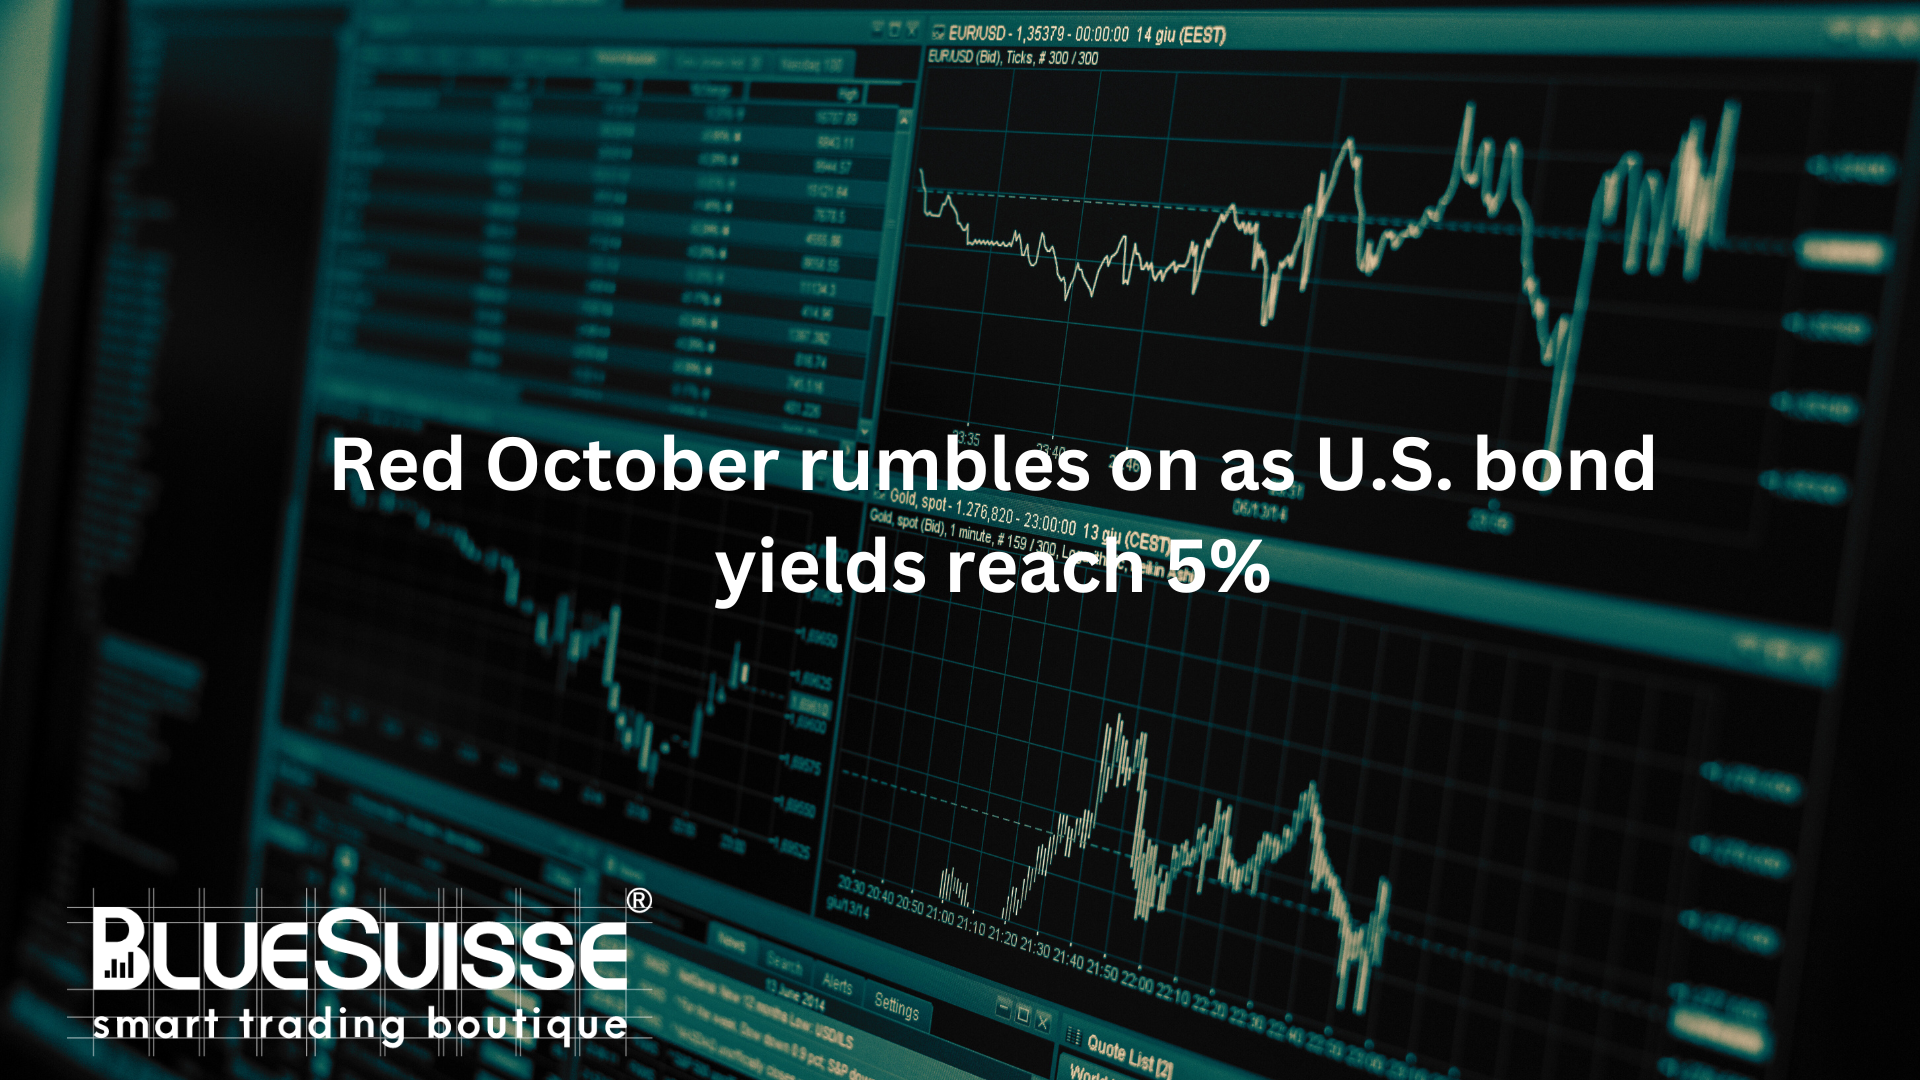 Red October rumbles on as U.S. bond yields reach 5%